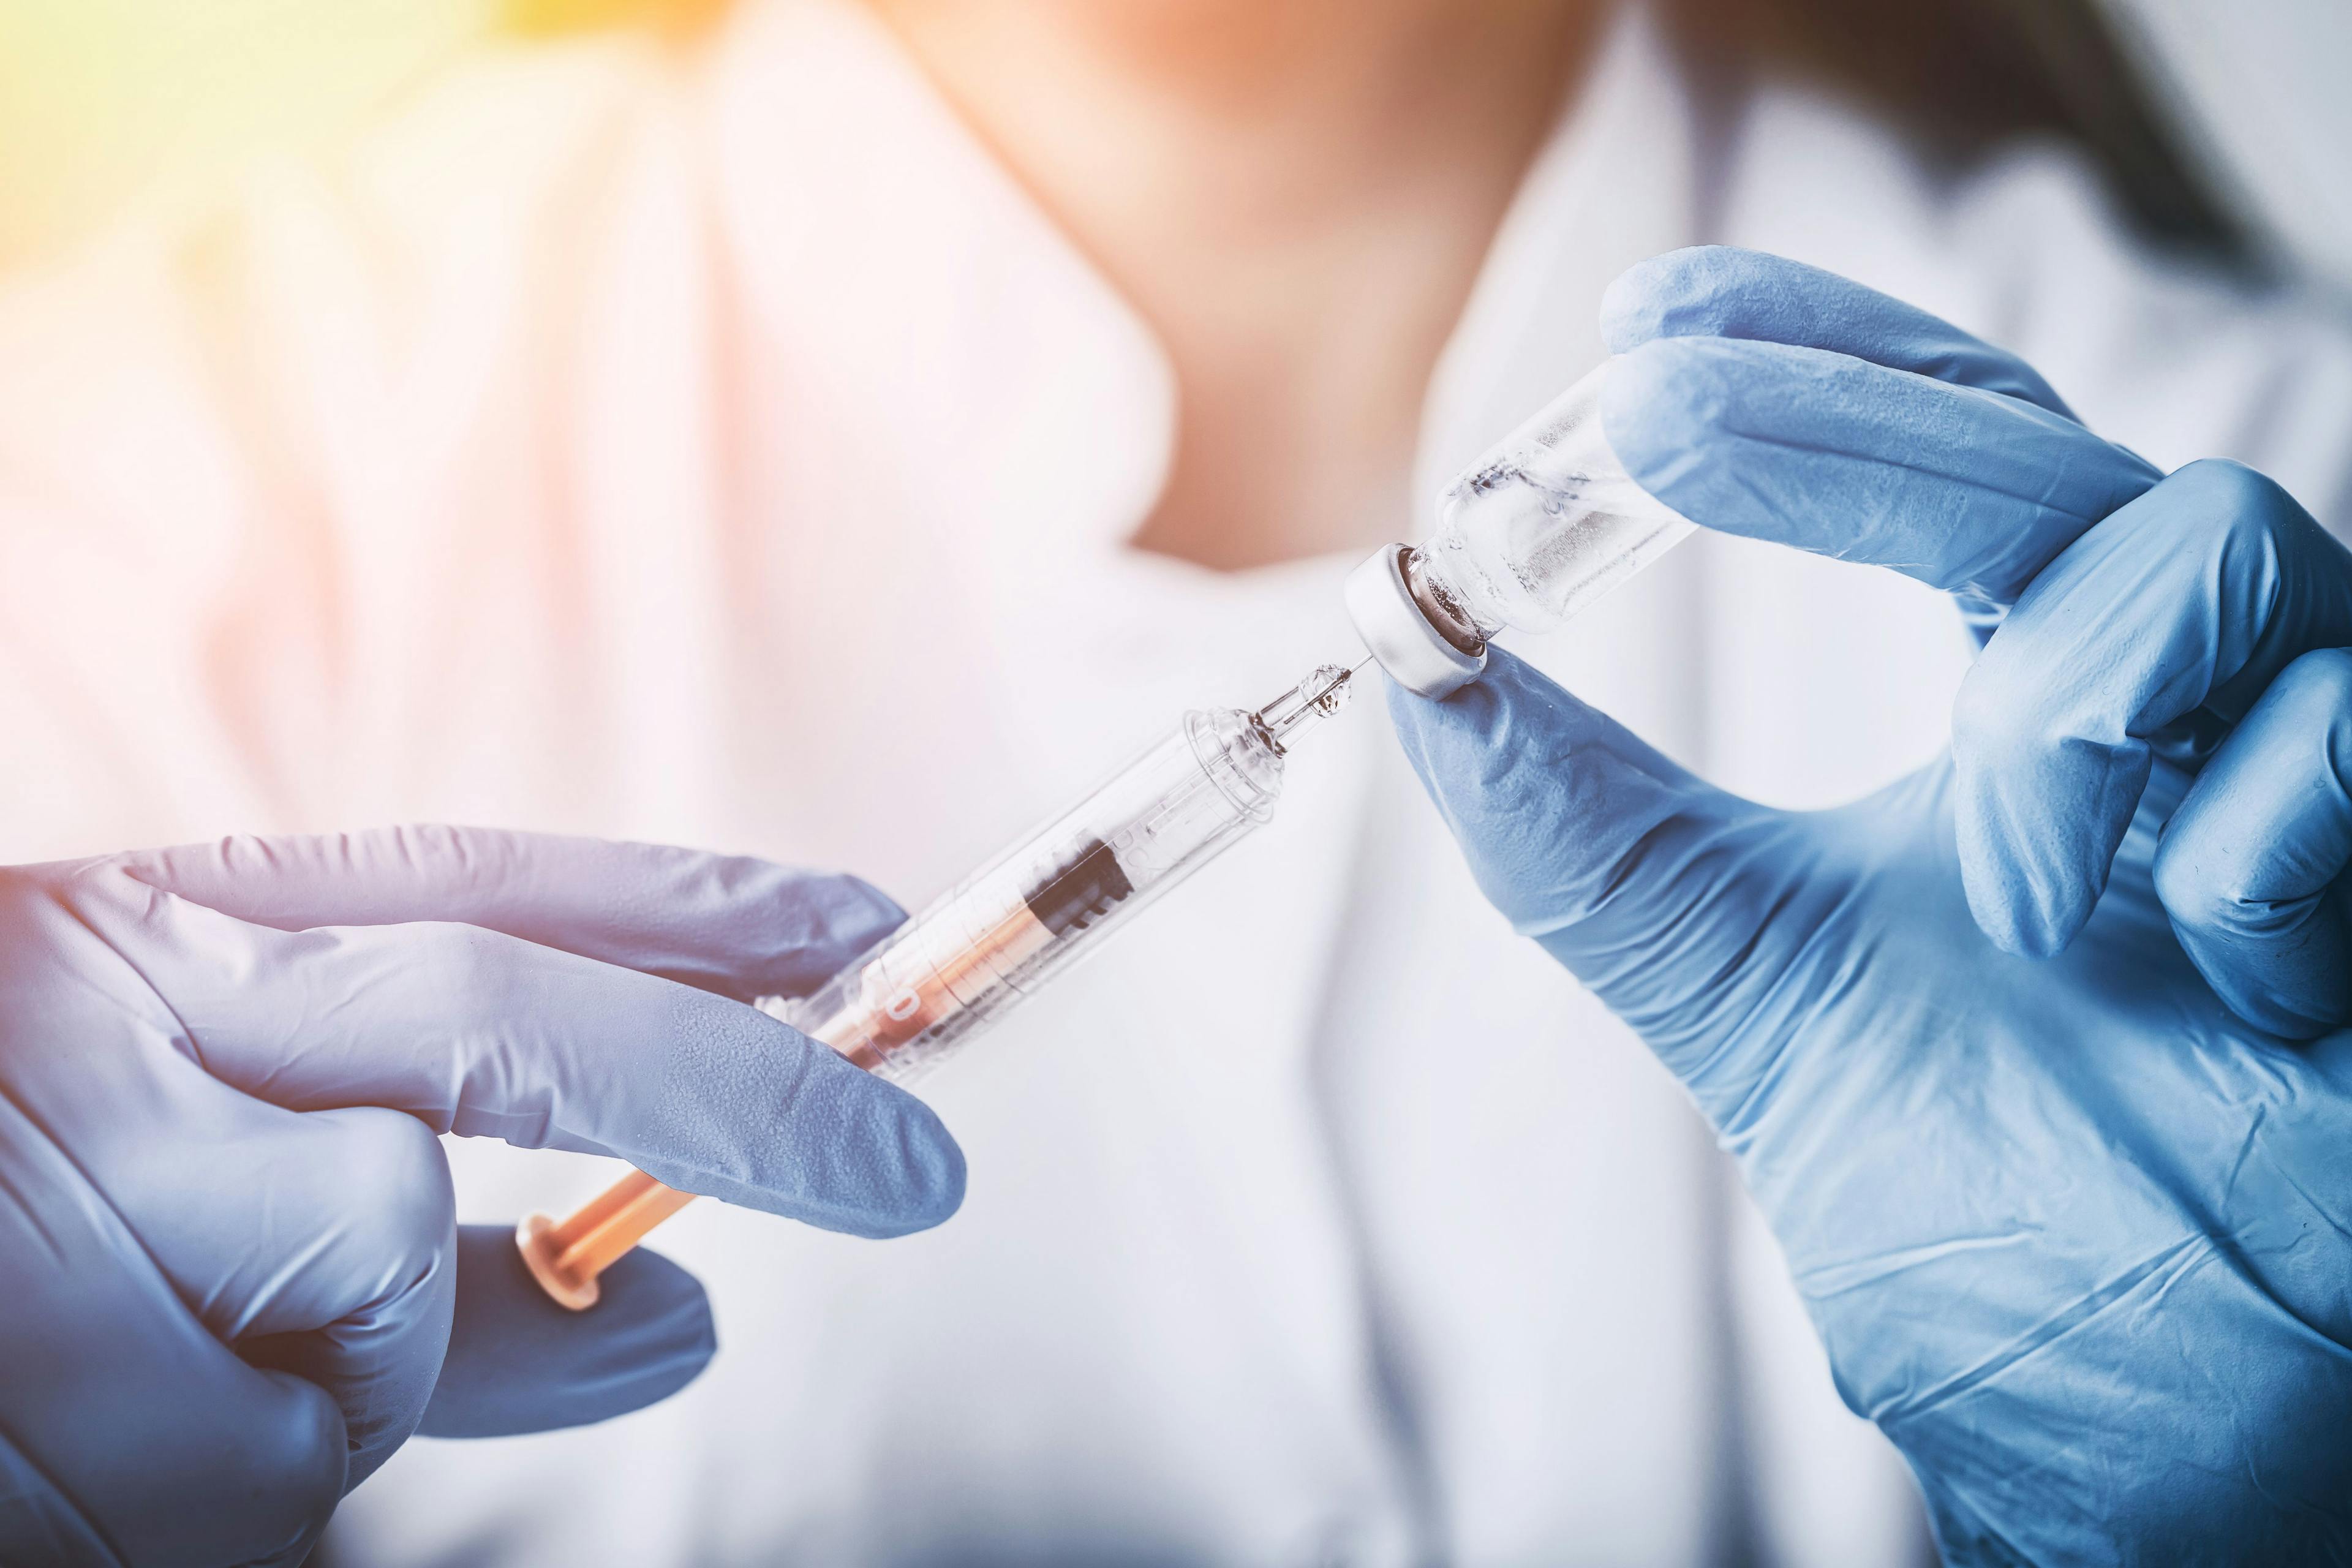 Researchers Find the Strongest Determinants of Getting a Flu Shot